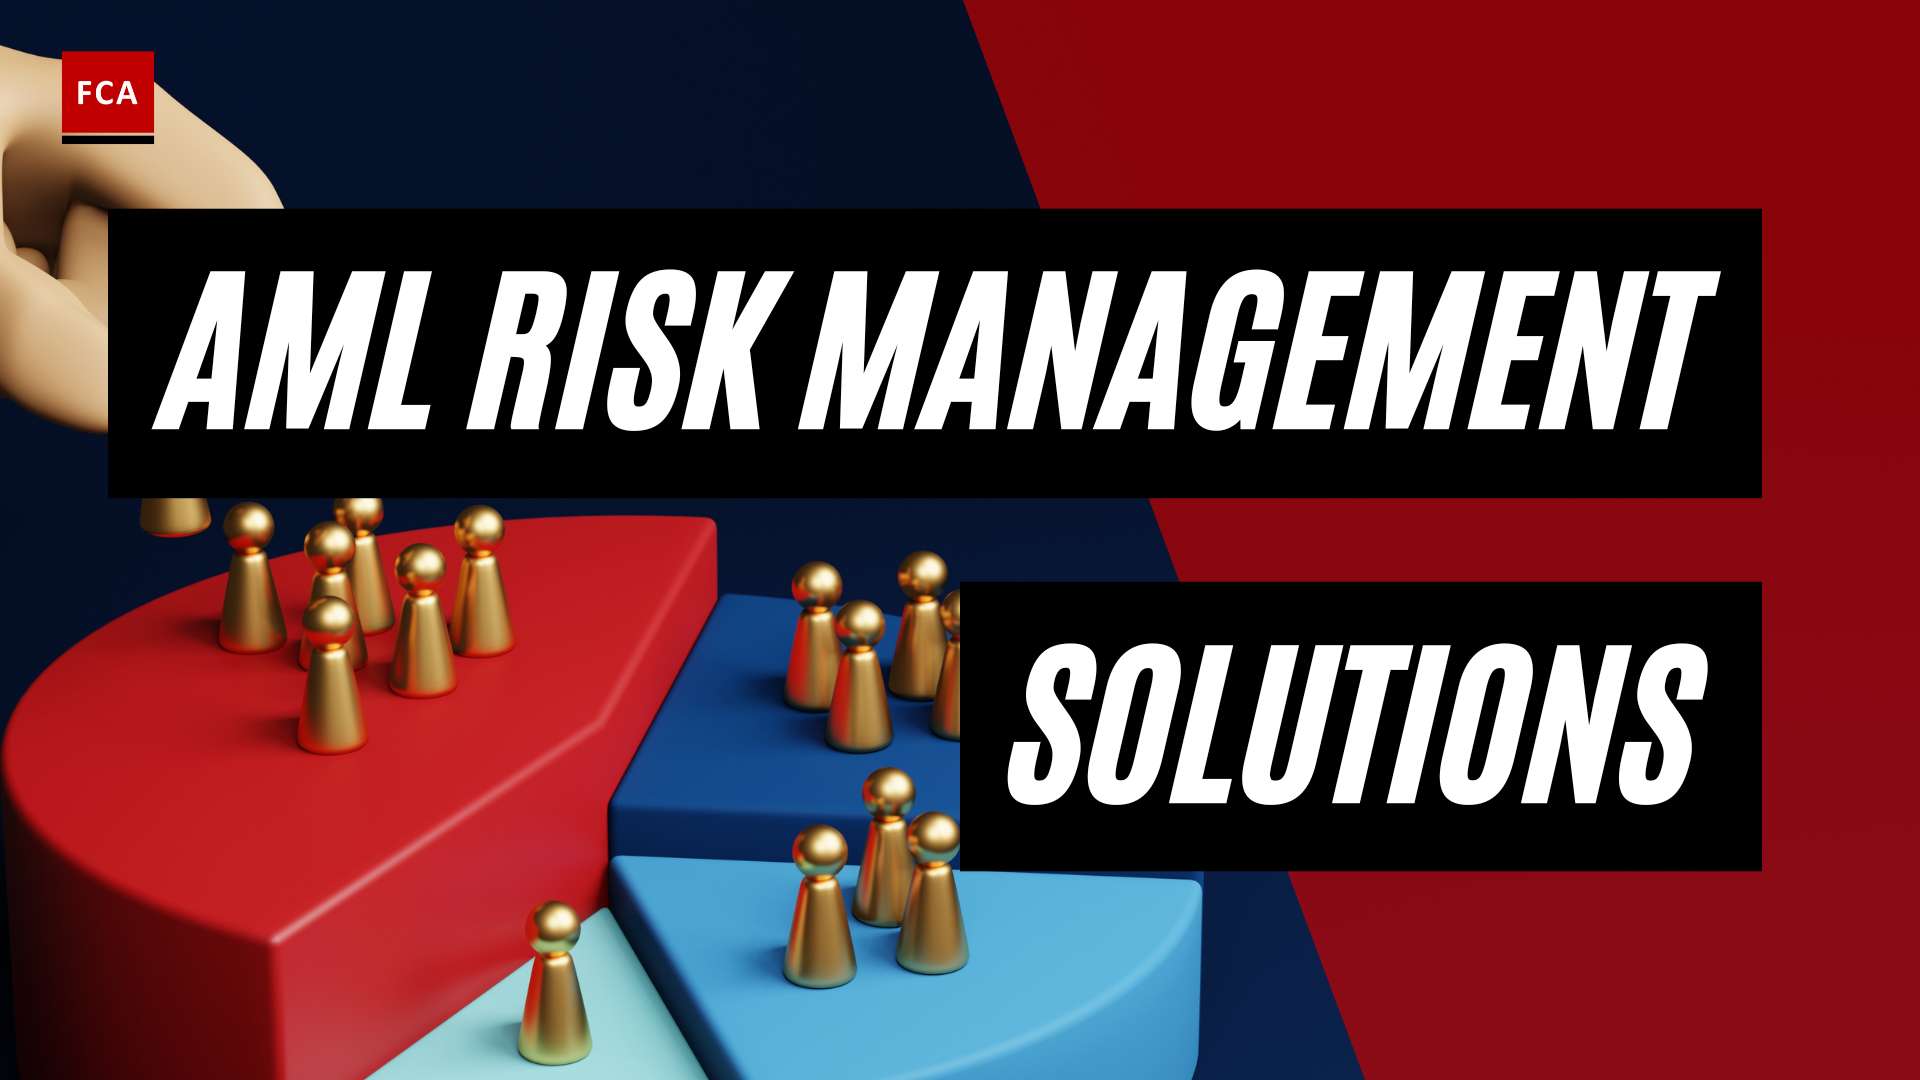 Stay Ahead Of The Game: Aml Compliance Solutions For Risk Management Professionals